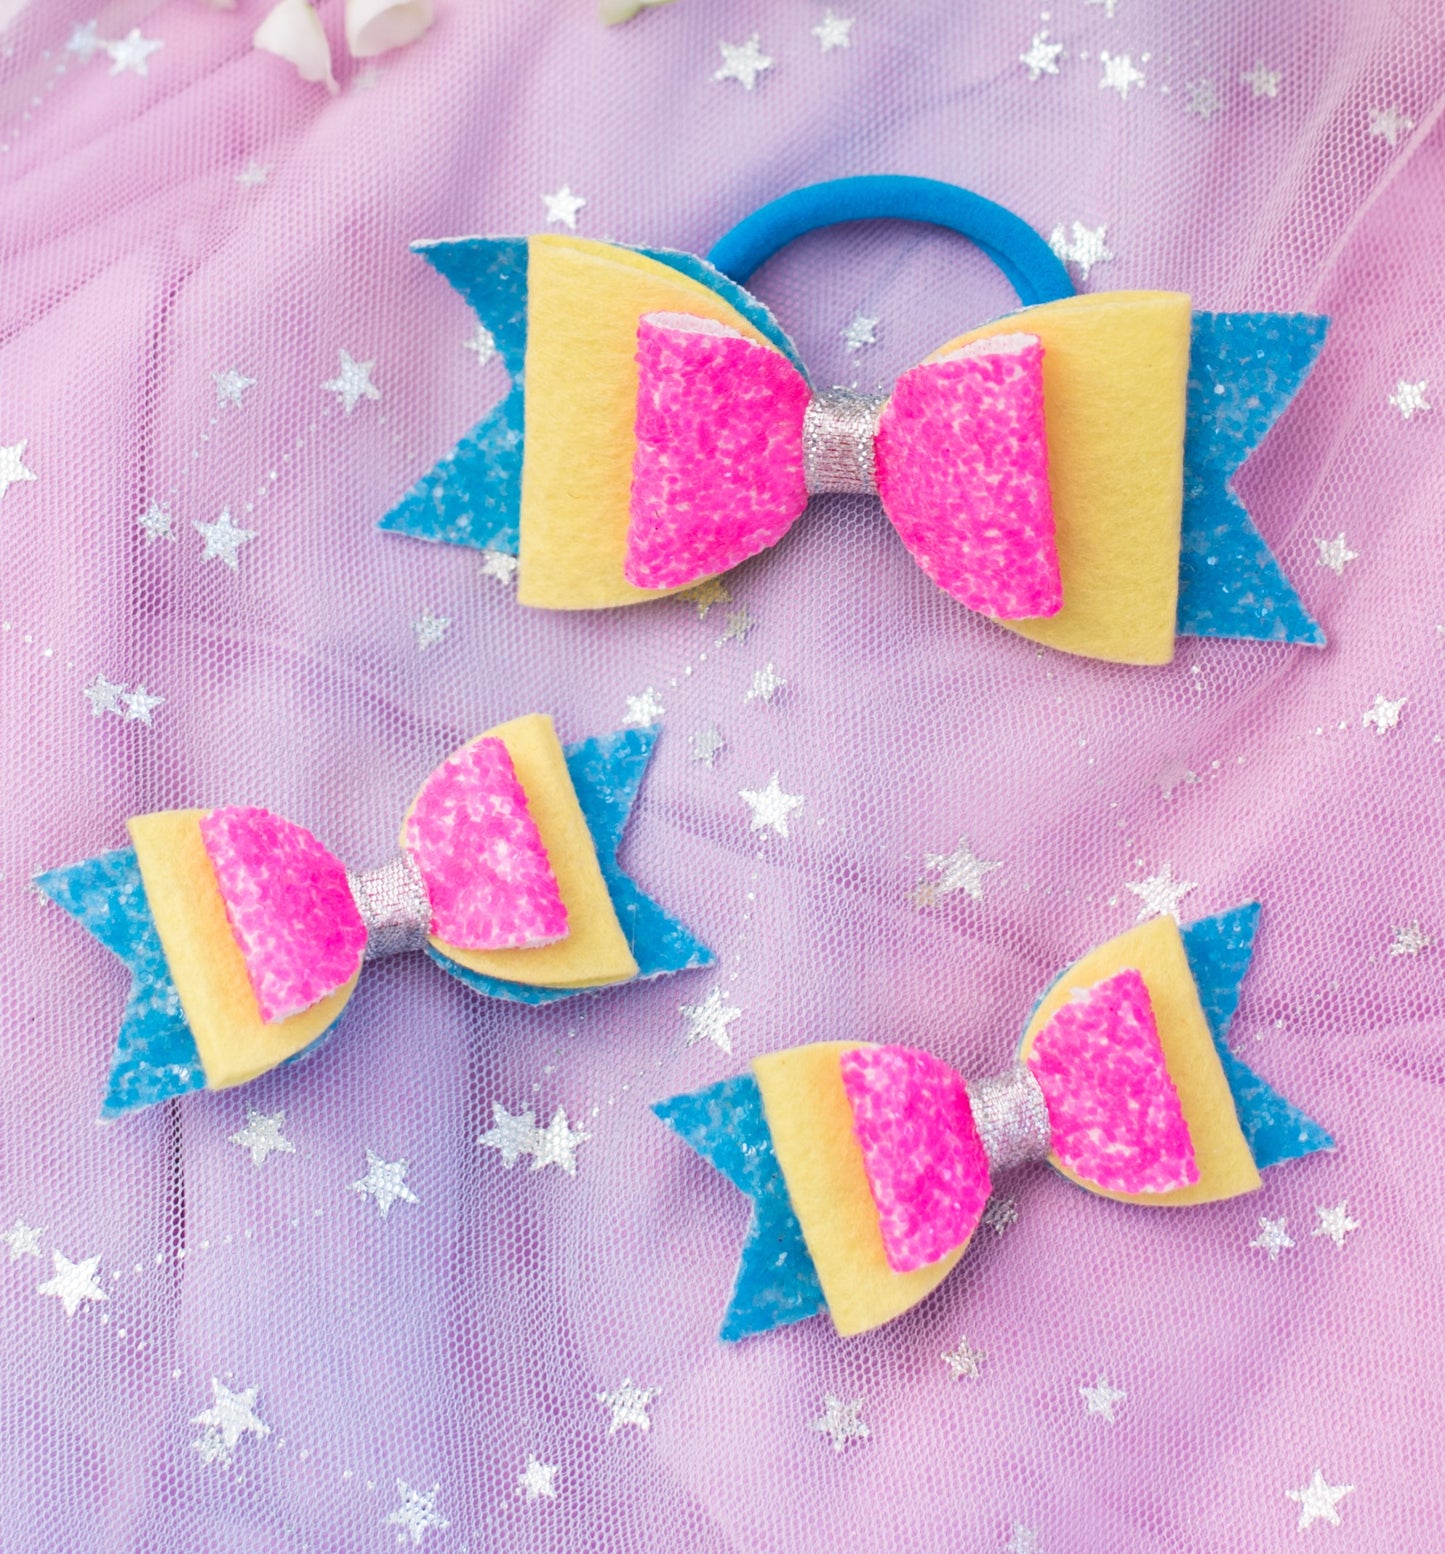 Fancy glitter bow on Alligator  pins (2 nos) and Cute Big Rubber bow- Blue, pink, yellow and Silver